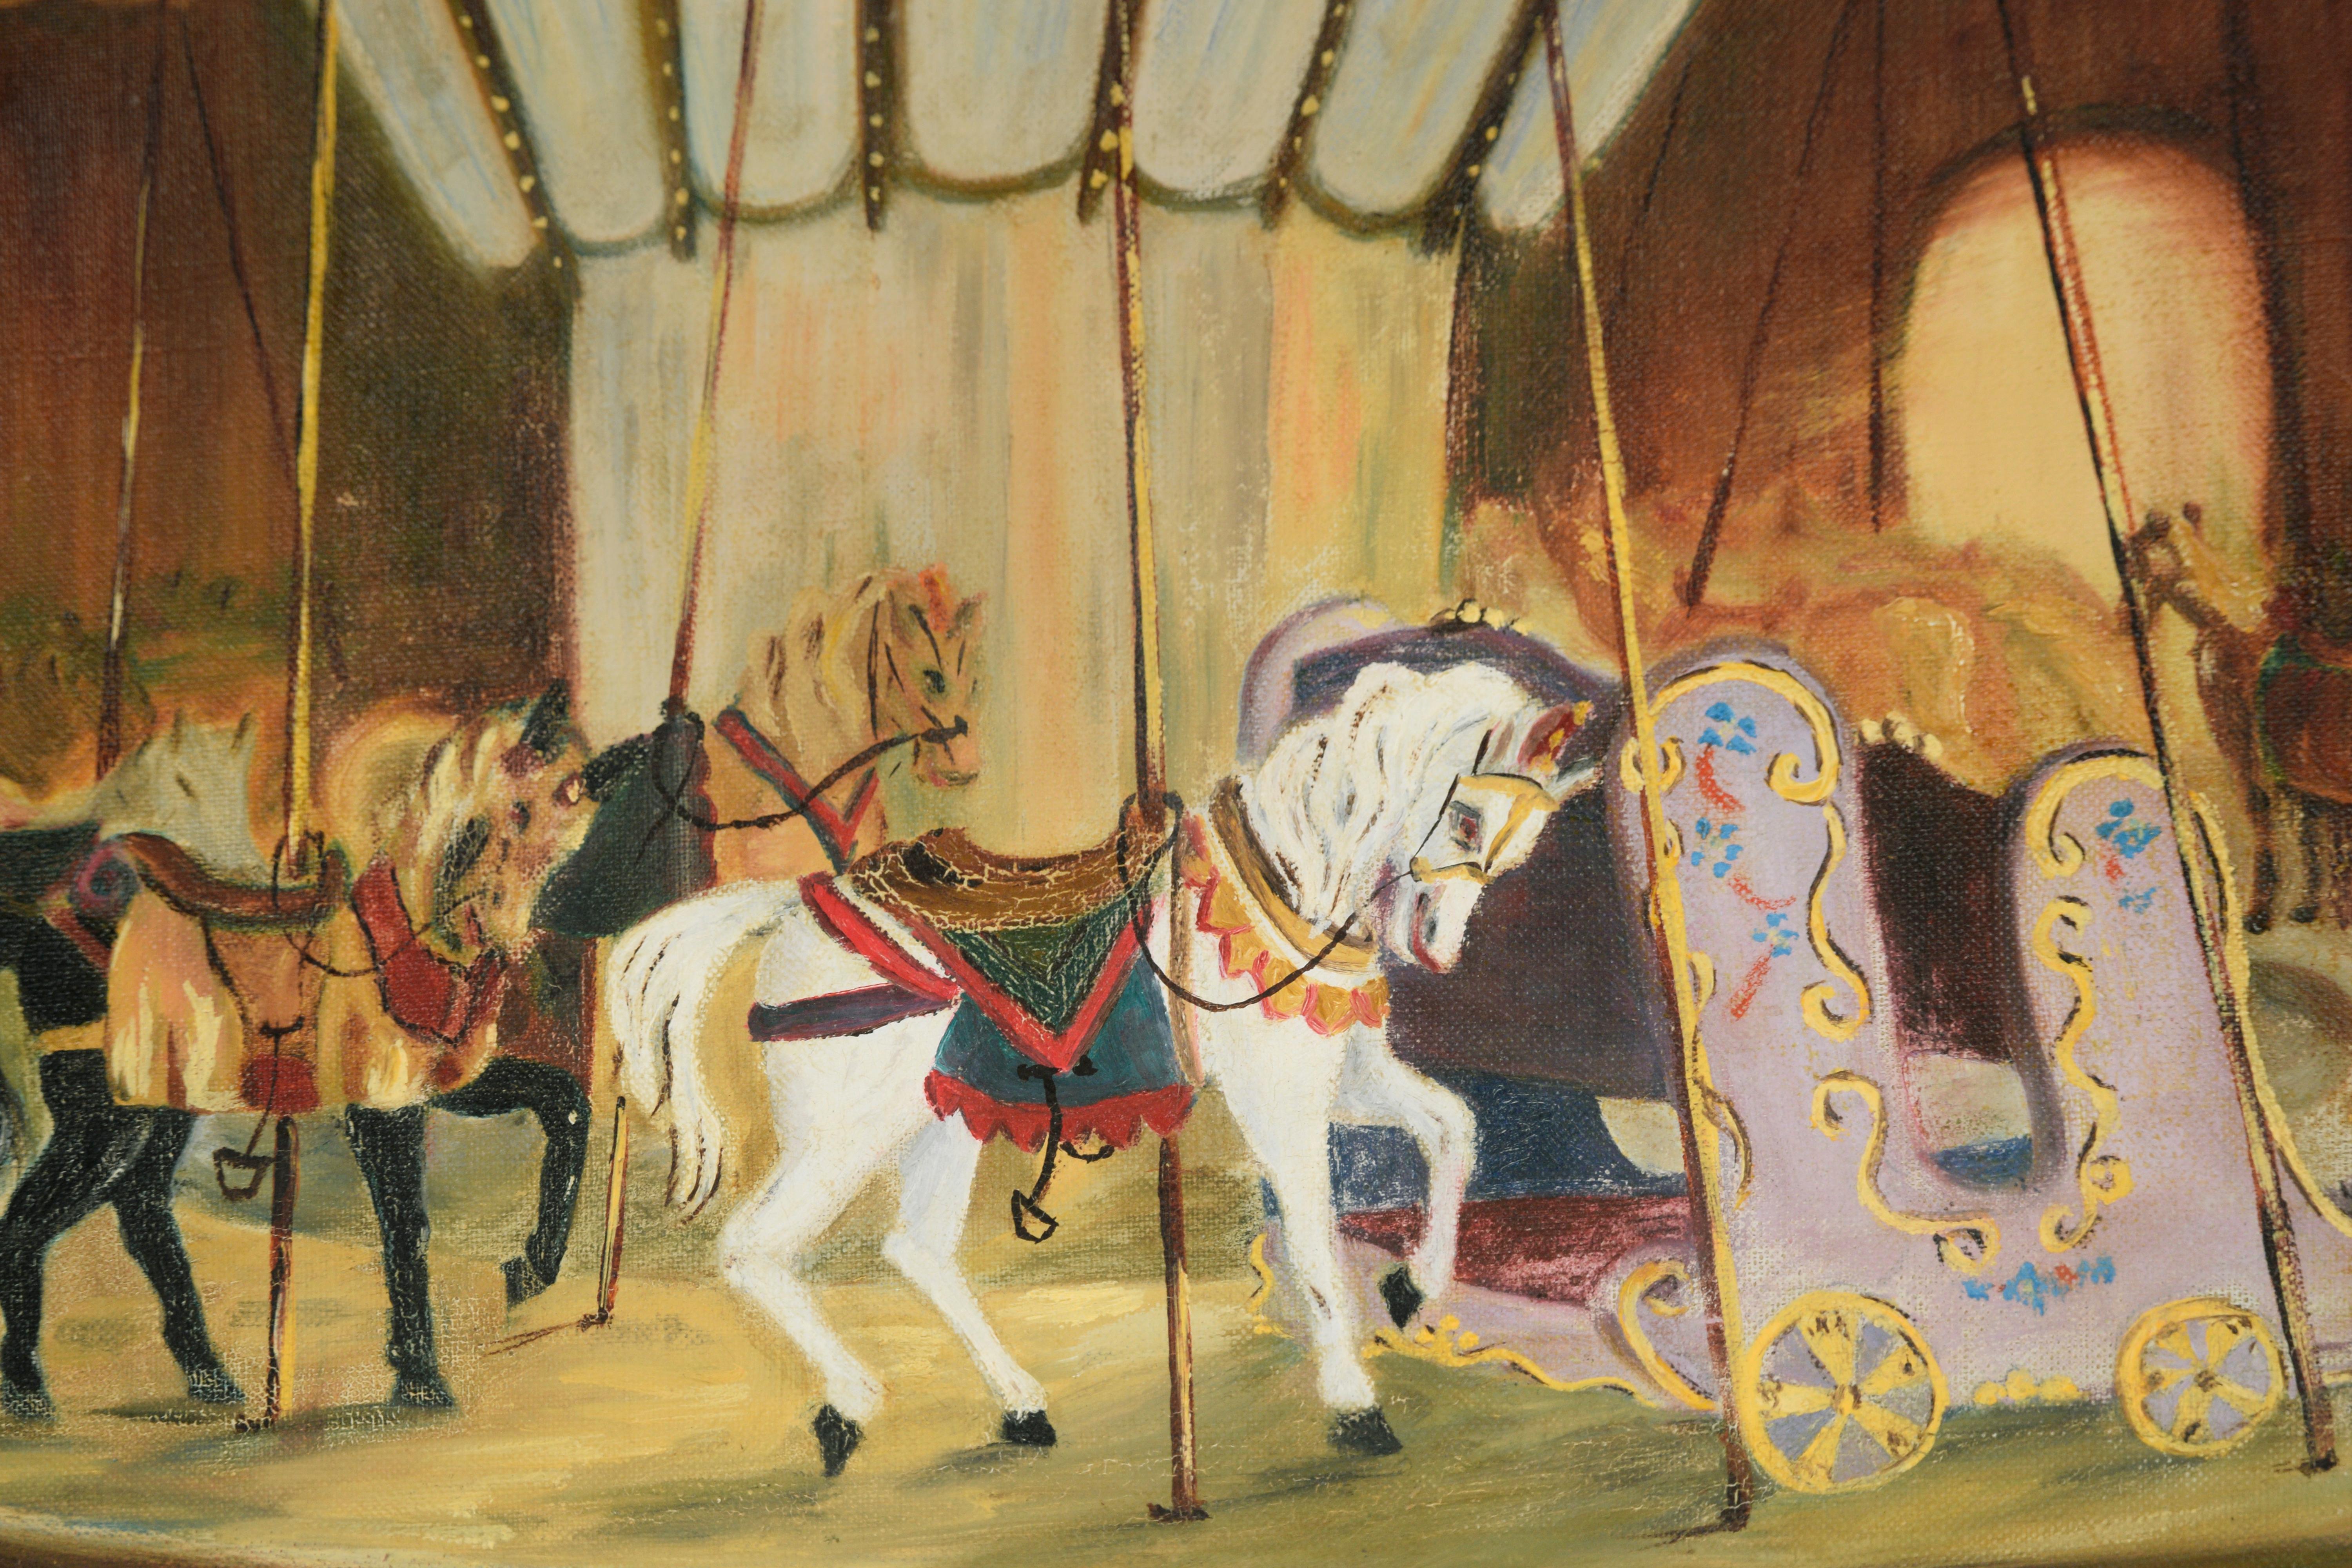 White Horse Carousel, 1956 - Oil On Canvas

Oil painting of an empty carousel ride, a single white horse gleams in the center. Three doorways are seen to the right, with sunlight emanating through. 

Signed 